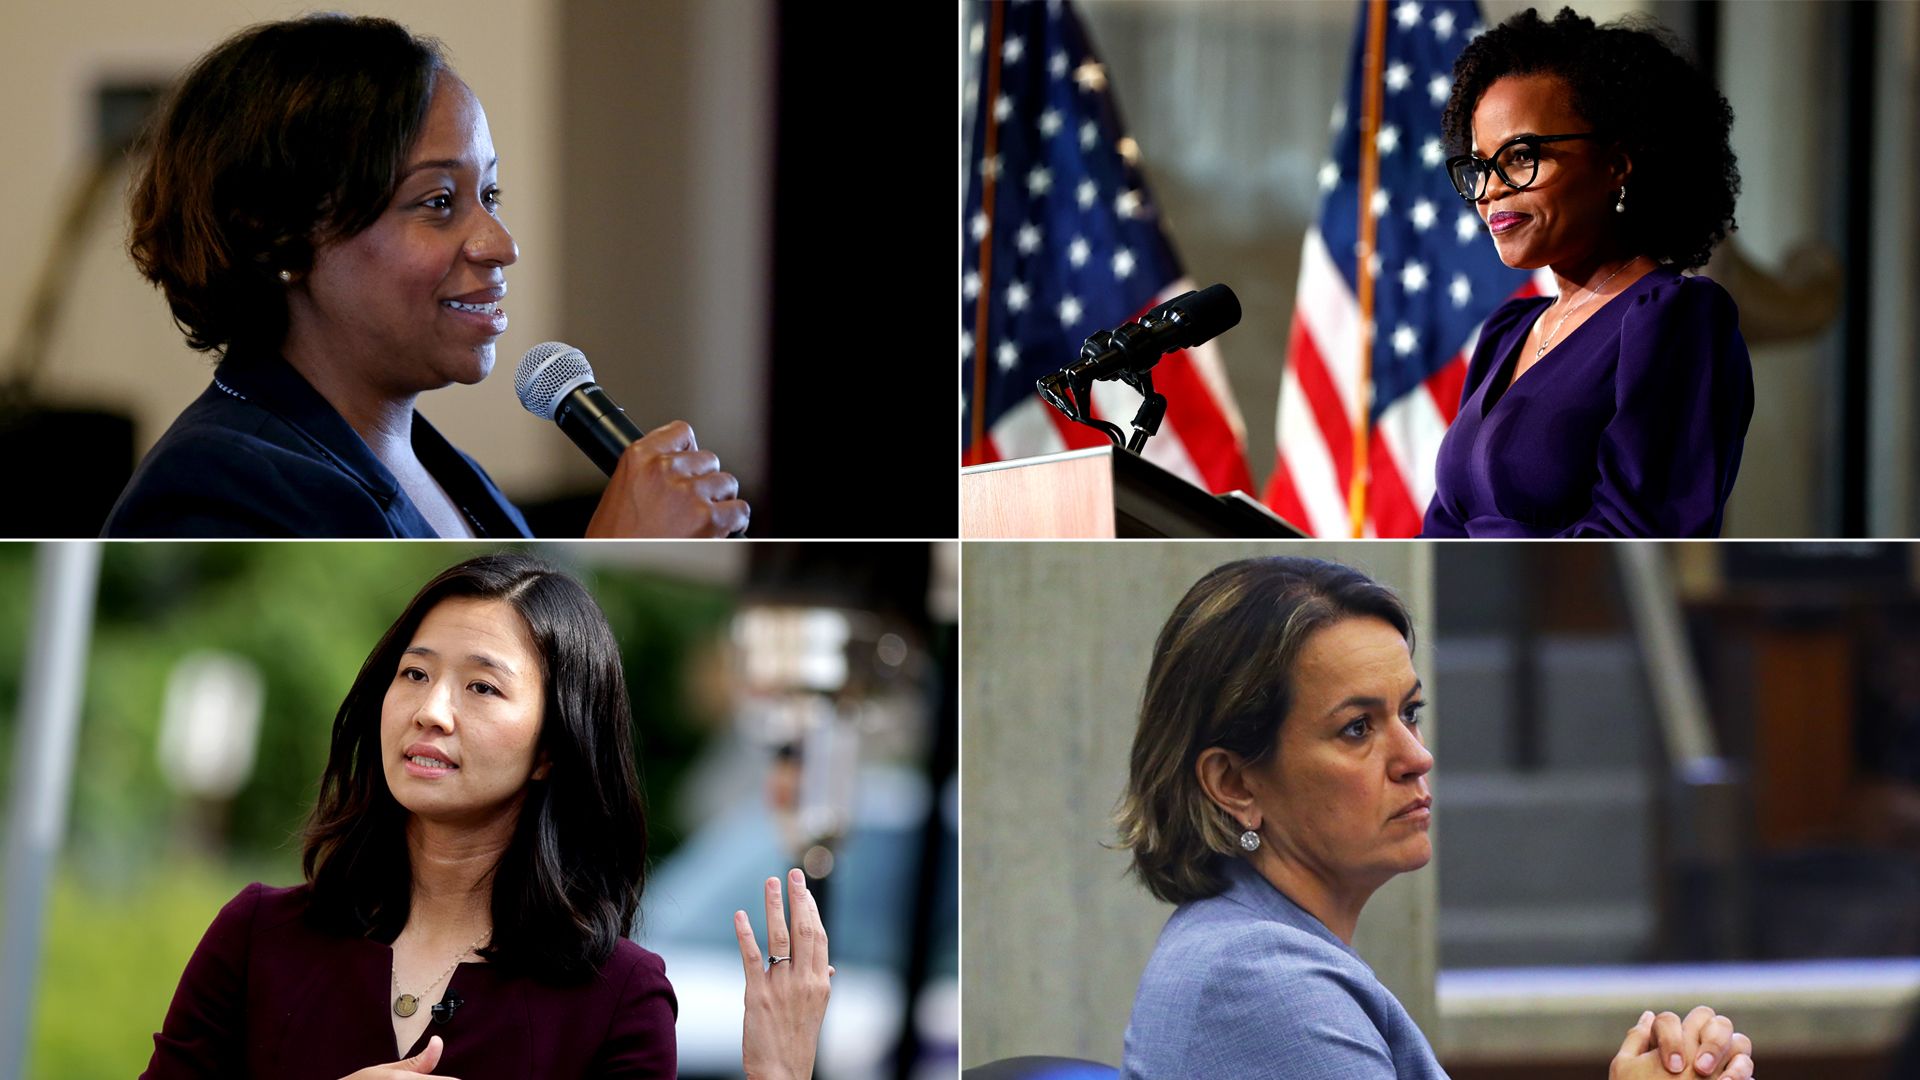 A series of Boston mayoral candidates is seen in a four-way panel.